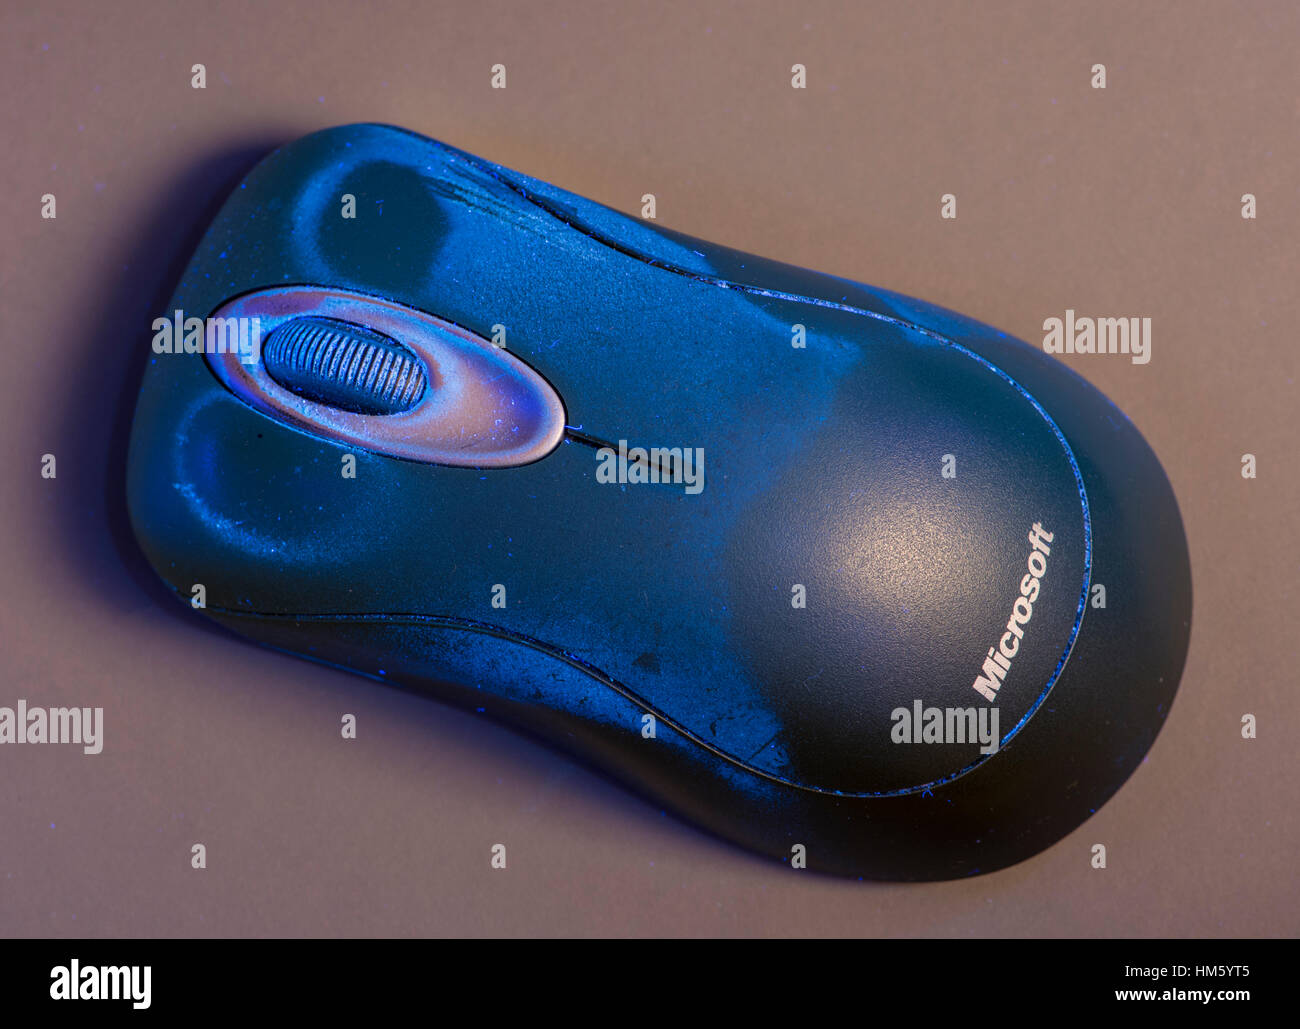 Computer mouse, fluorescing in UV light, showing dirt on surface Stock Photo